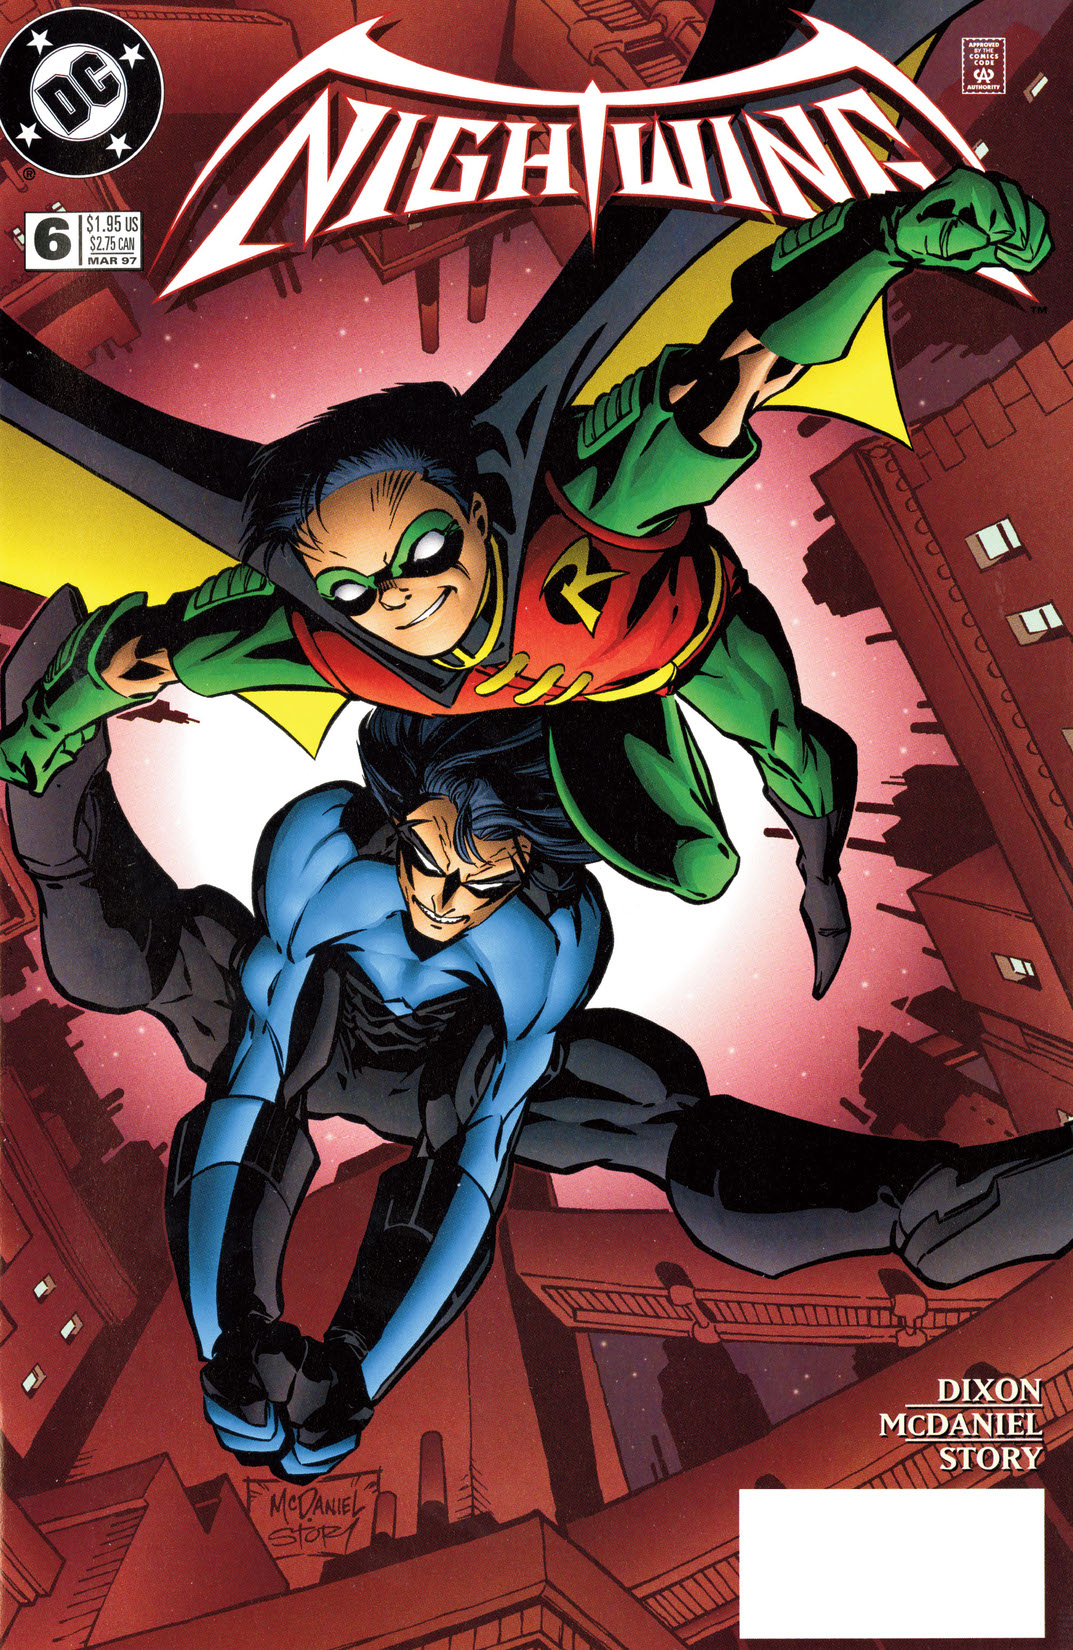 Nightwing (1996-) #6 preview images